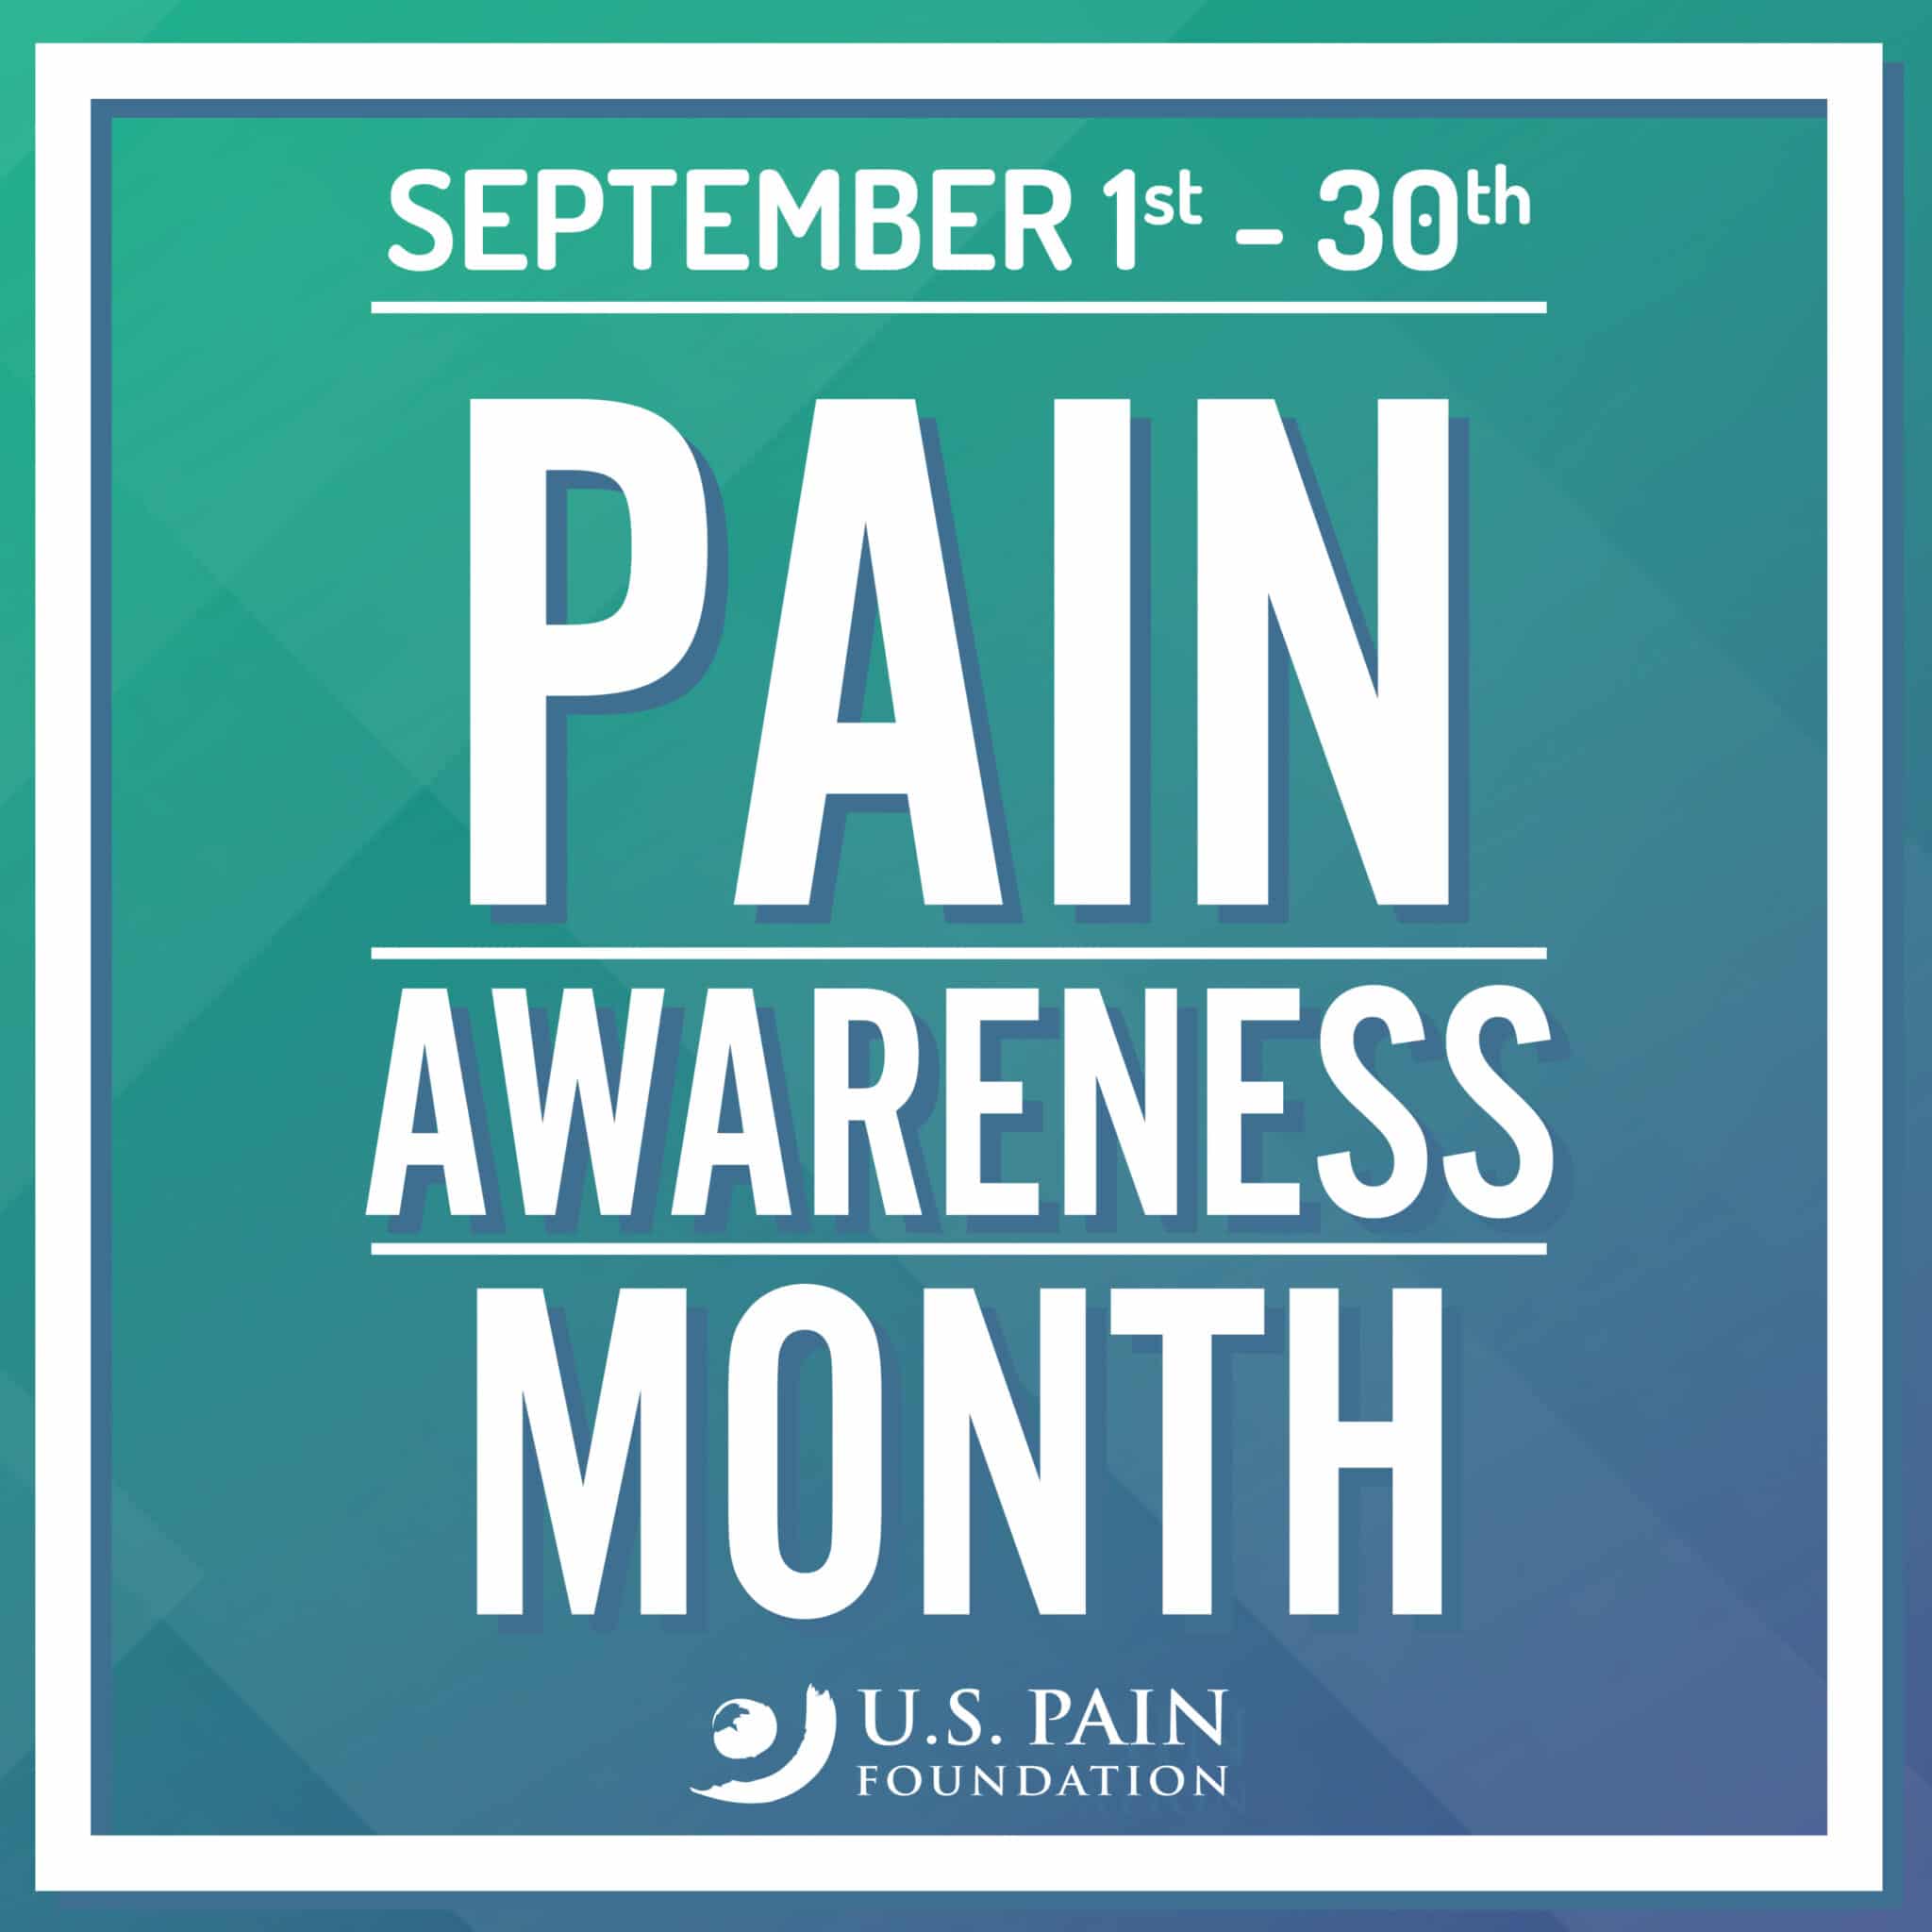 Pain Awareness Month campaign highlights gaps in pain care U.S. Pain